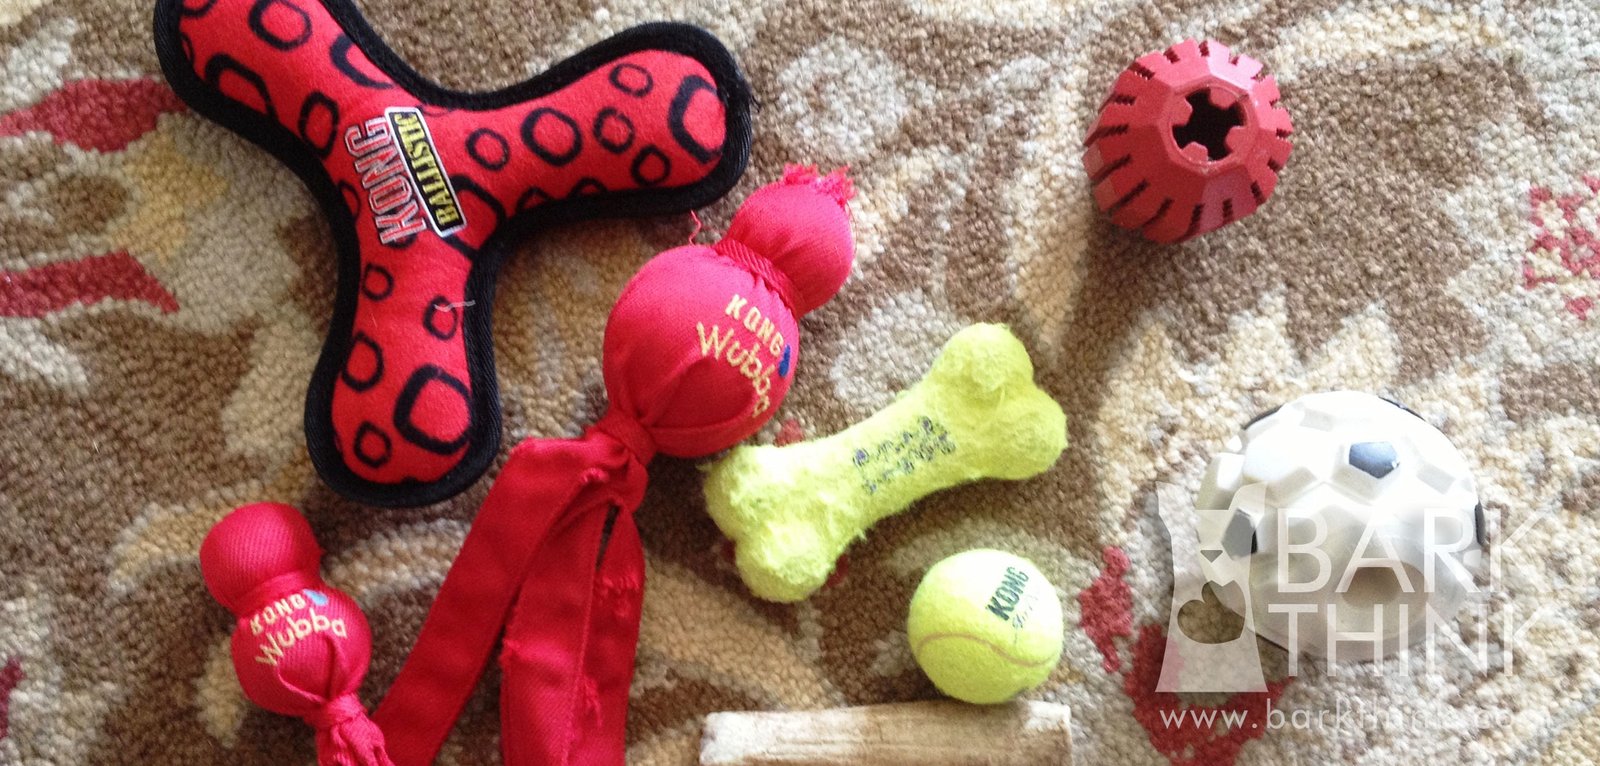 best tennis balls for dogs that chew